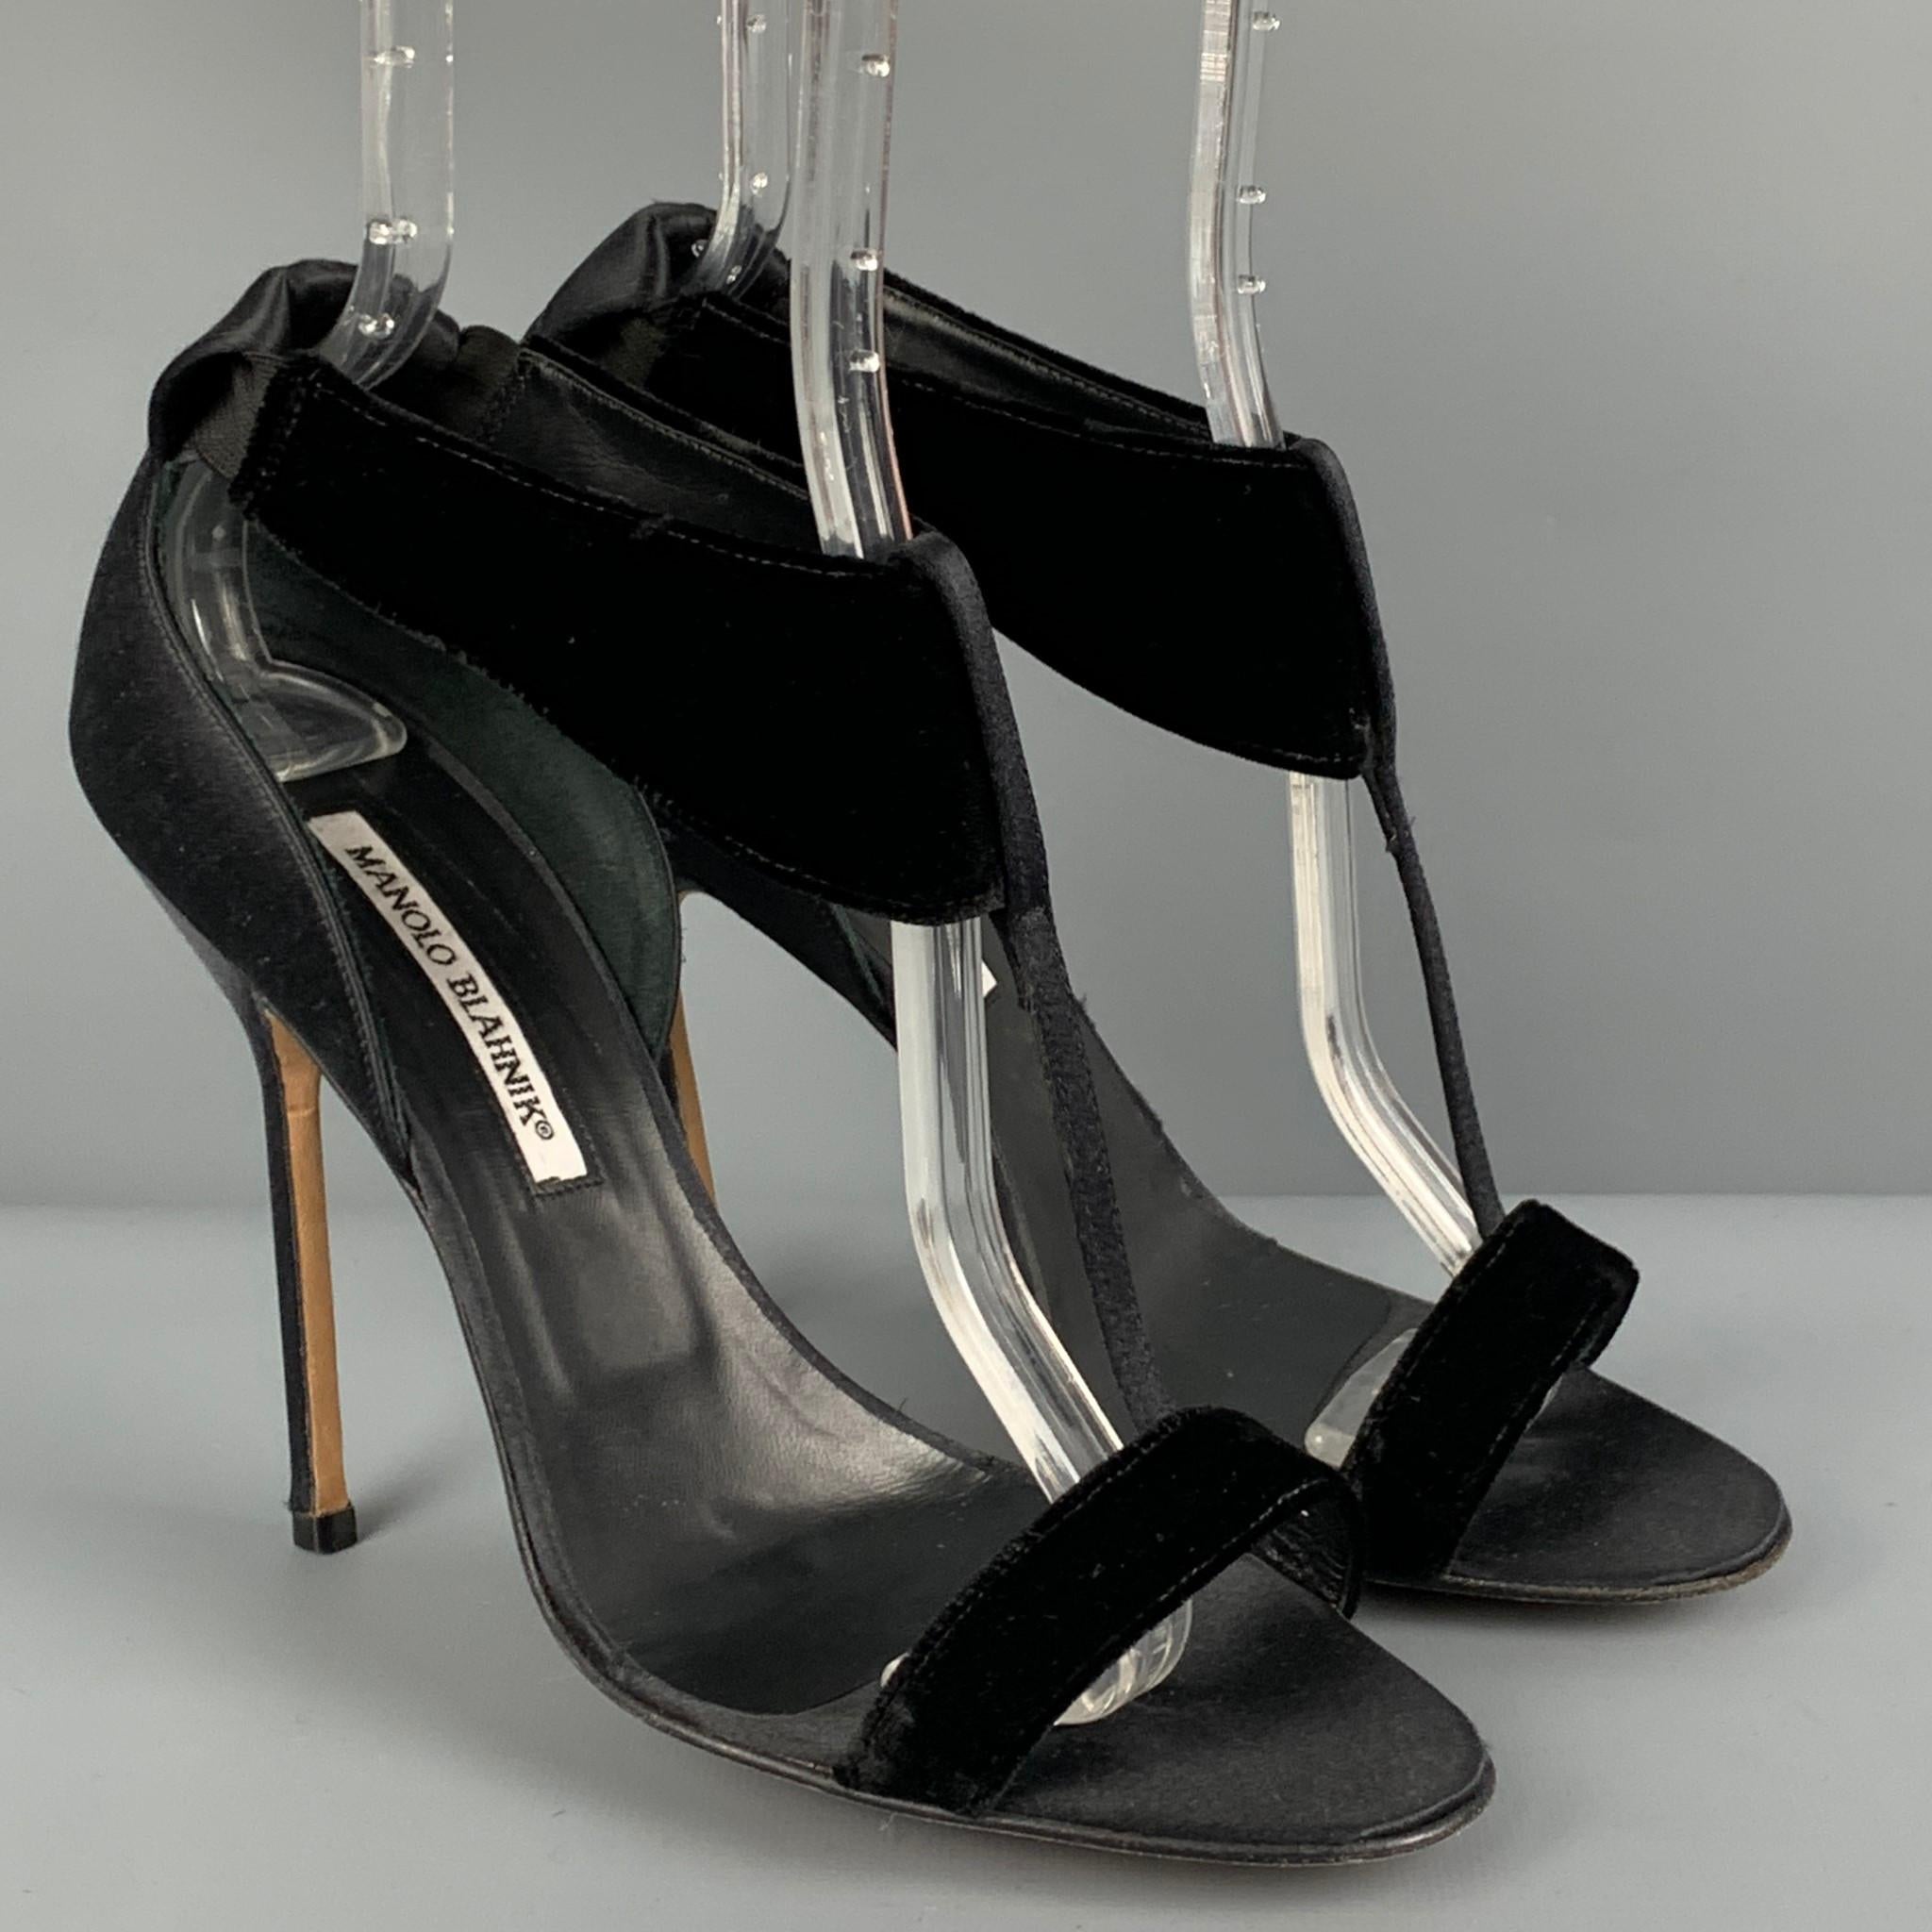 MANOLO BLAHNIK sandals comes in a black satin with a velvet trim featuring a t-strap style, open toe, and a stiletto heel. Made in Italy. 

Very Good Pre-Owned Condition.
Marked: 39

Measurements:

Heel: 4.5 in. 